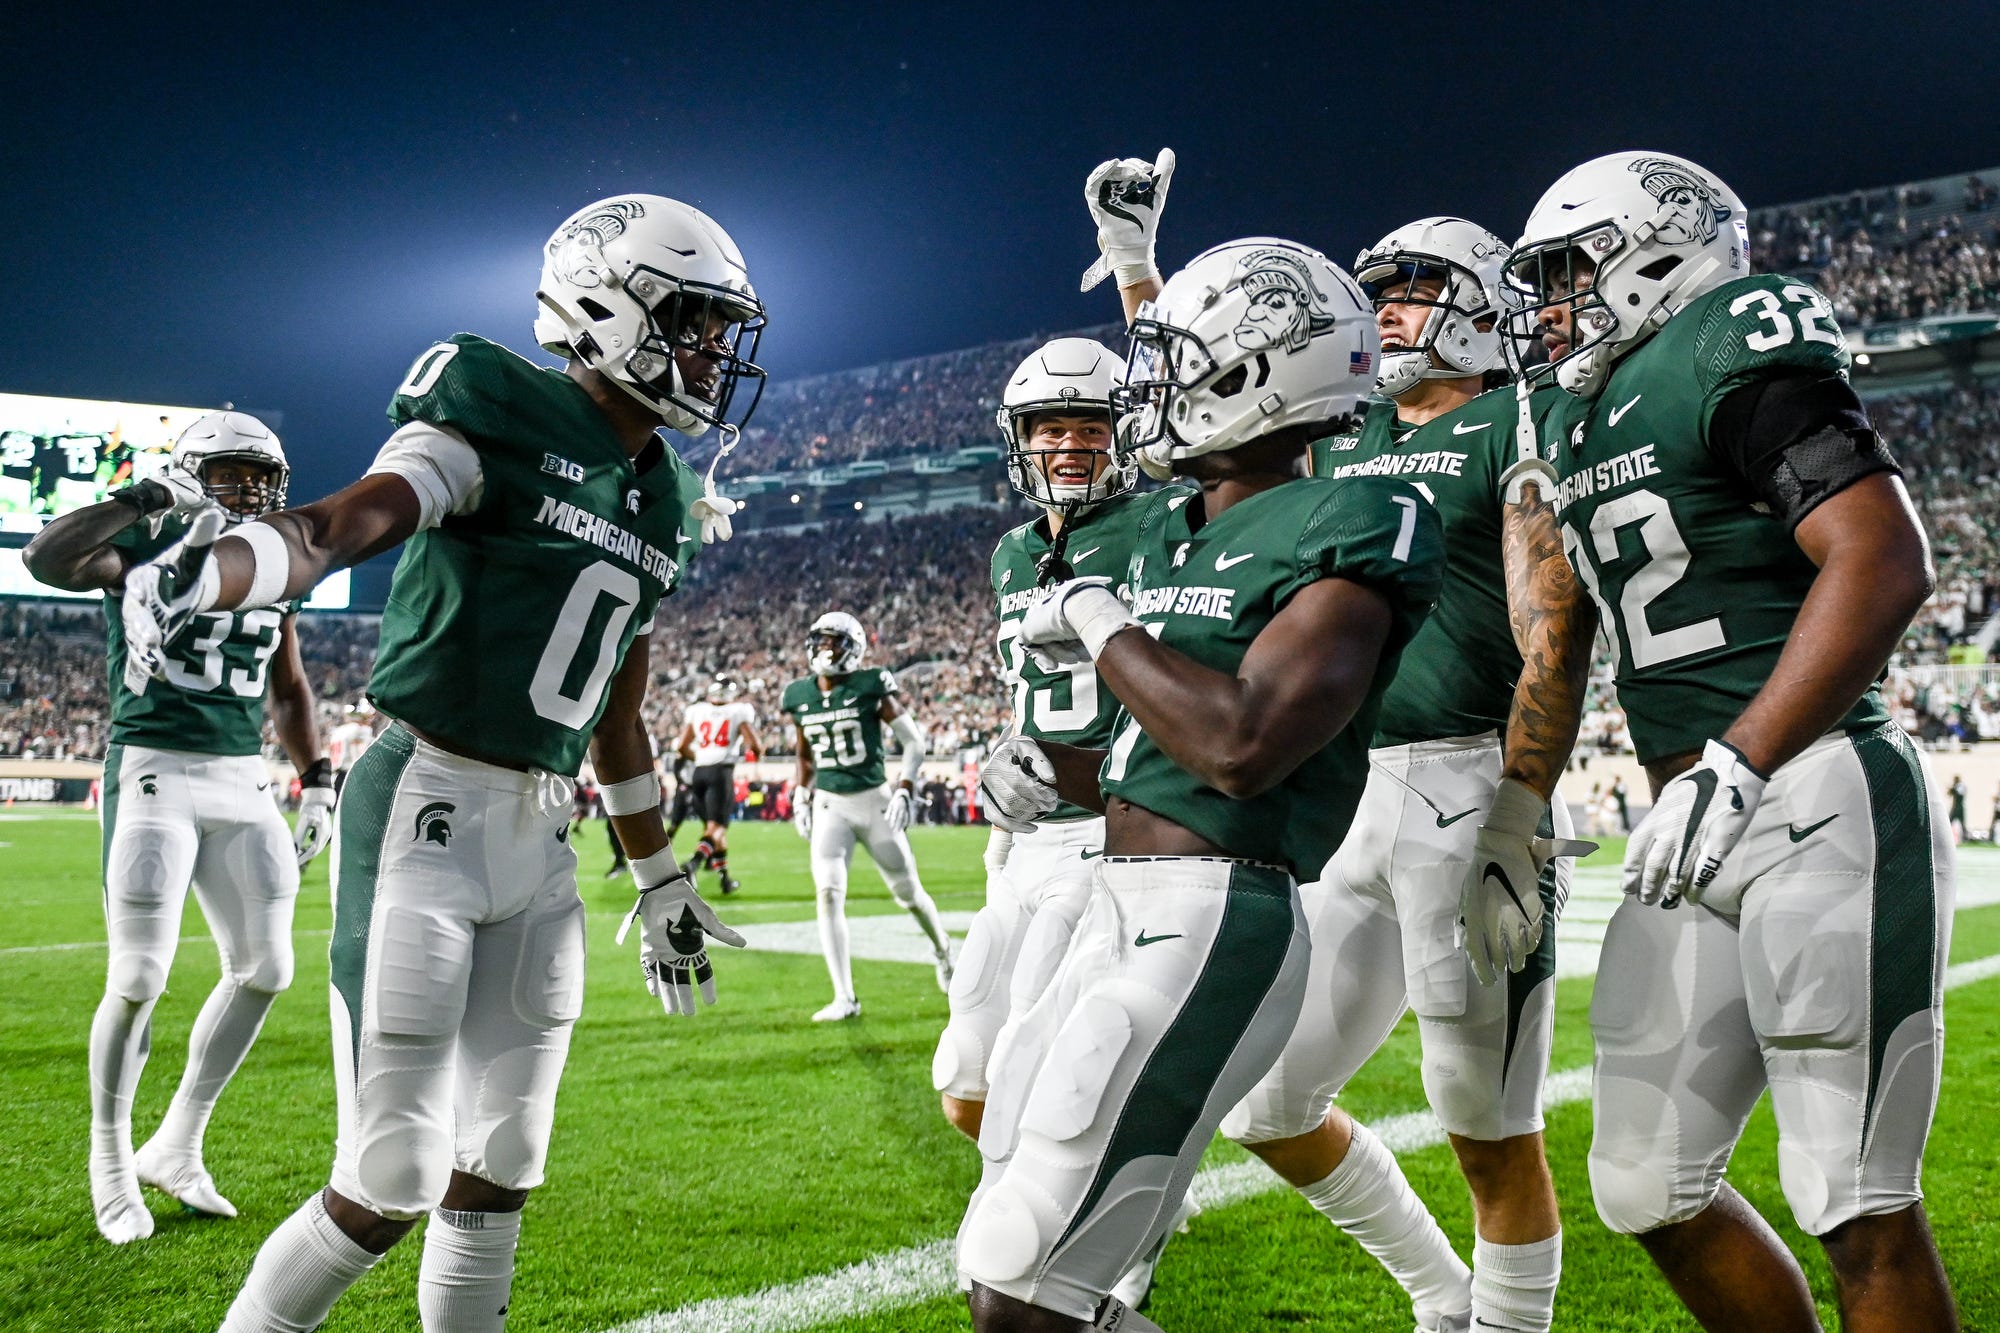 Mich State Football Schedule 2022 Msu Football's 2022 Big Ten Schedule Unveiled: 3 Quick Takes